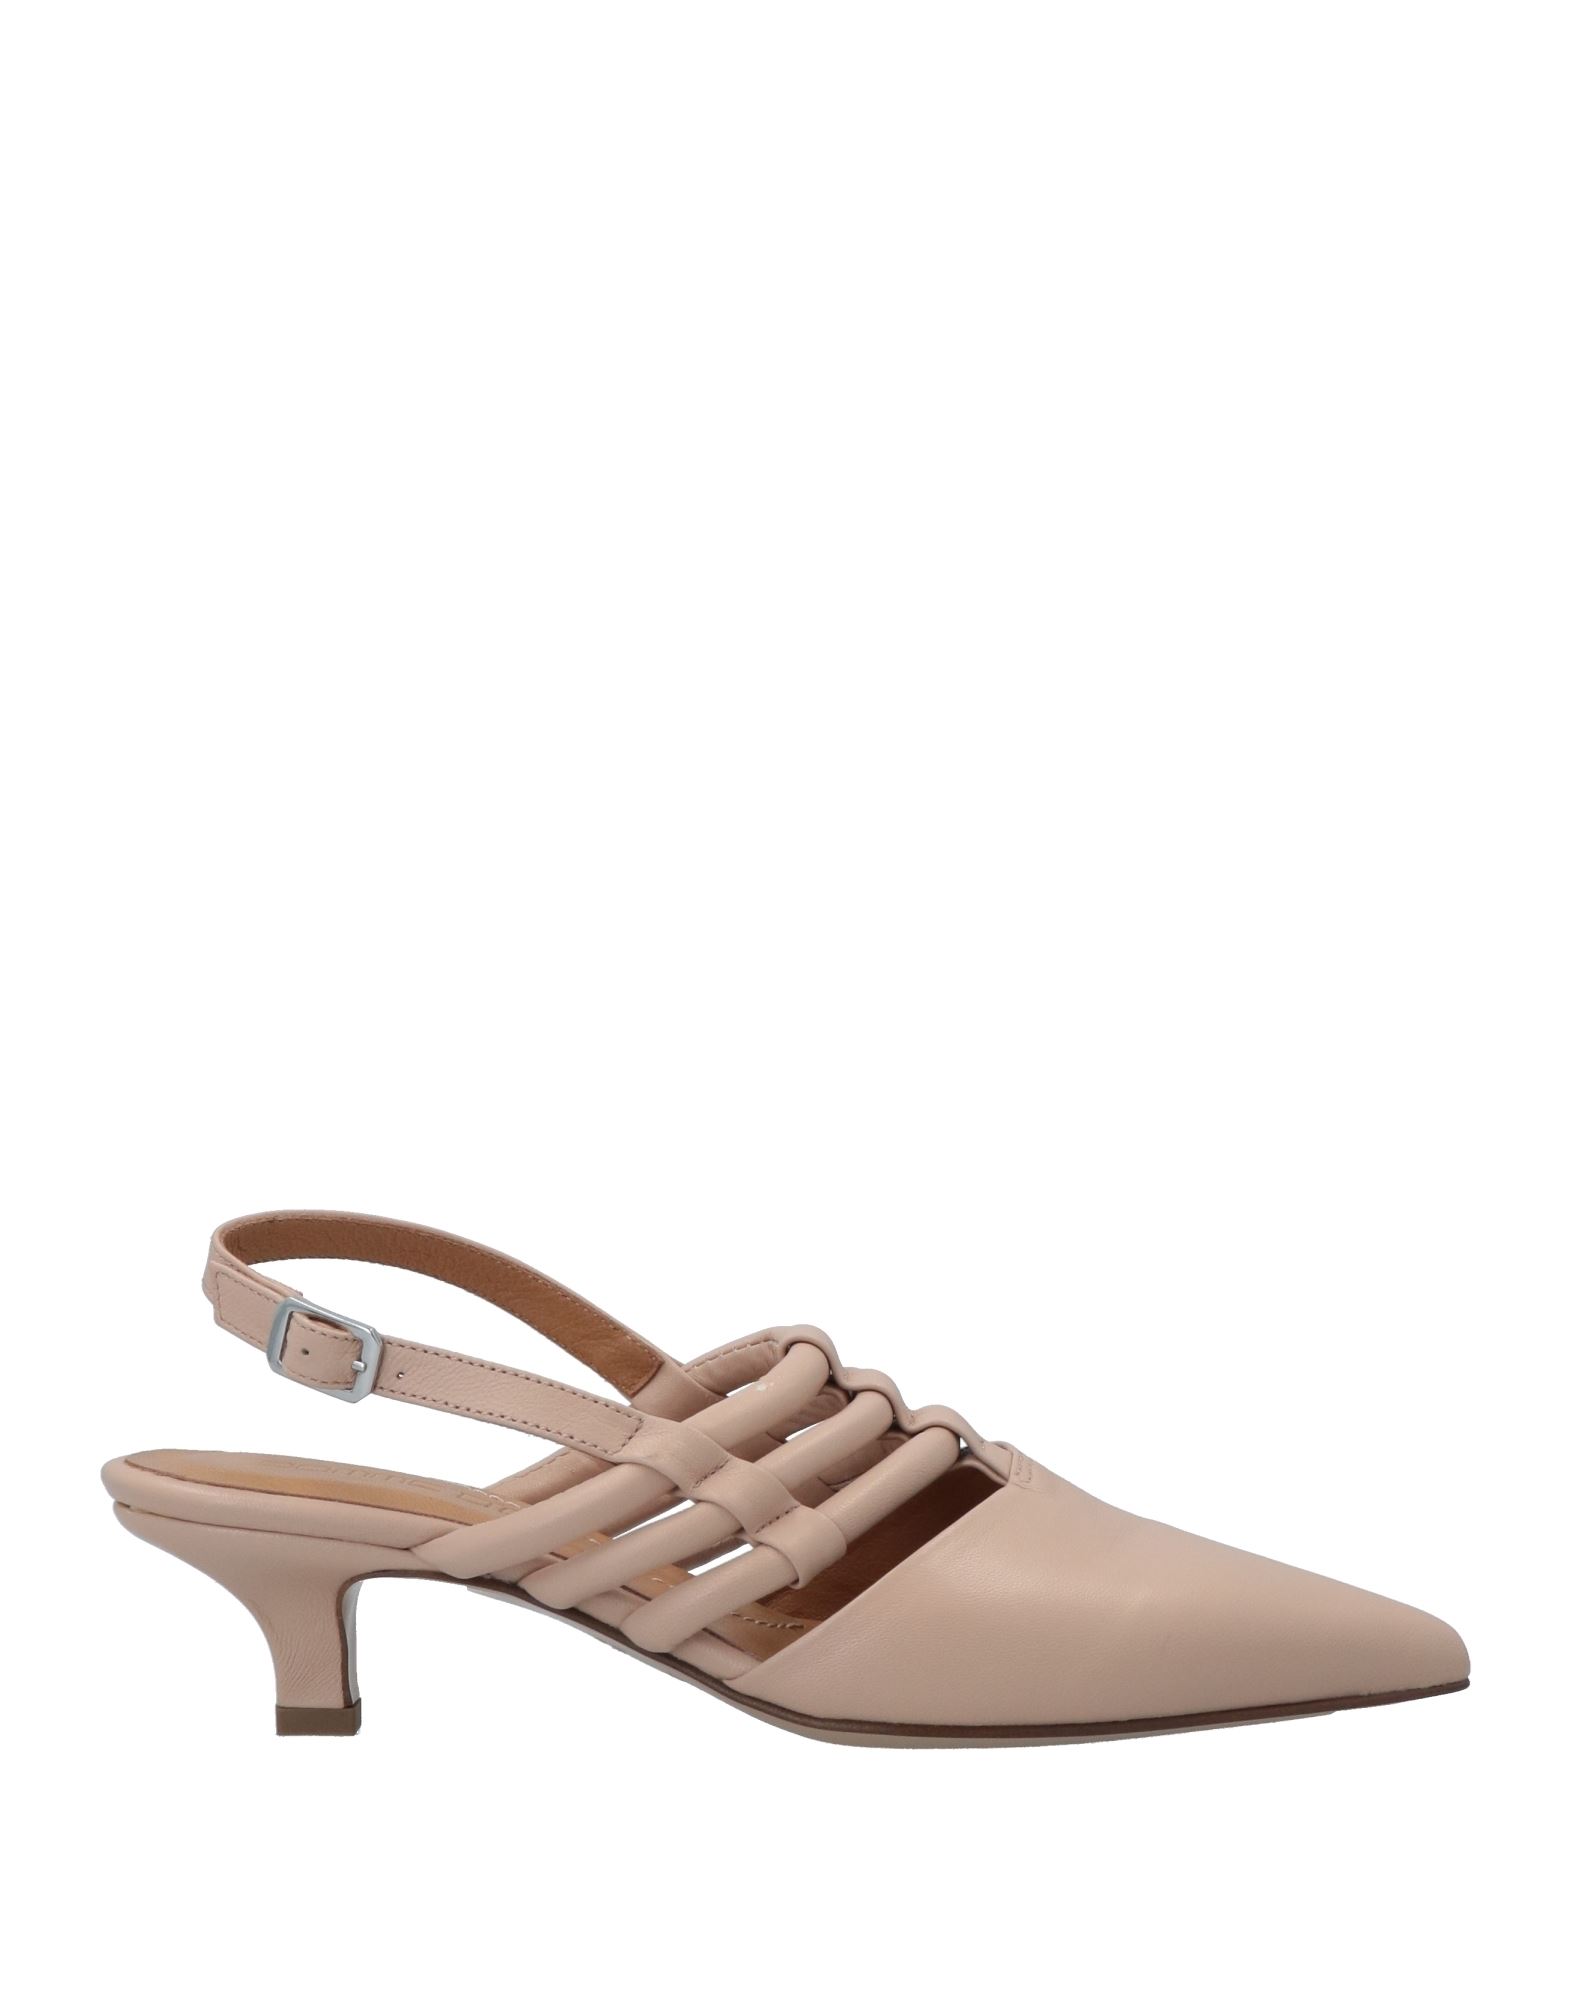 Pomme D'or Pumps In Pink